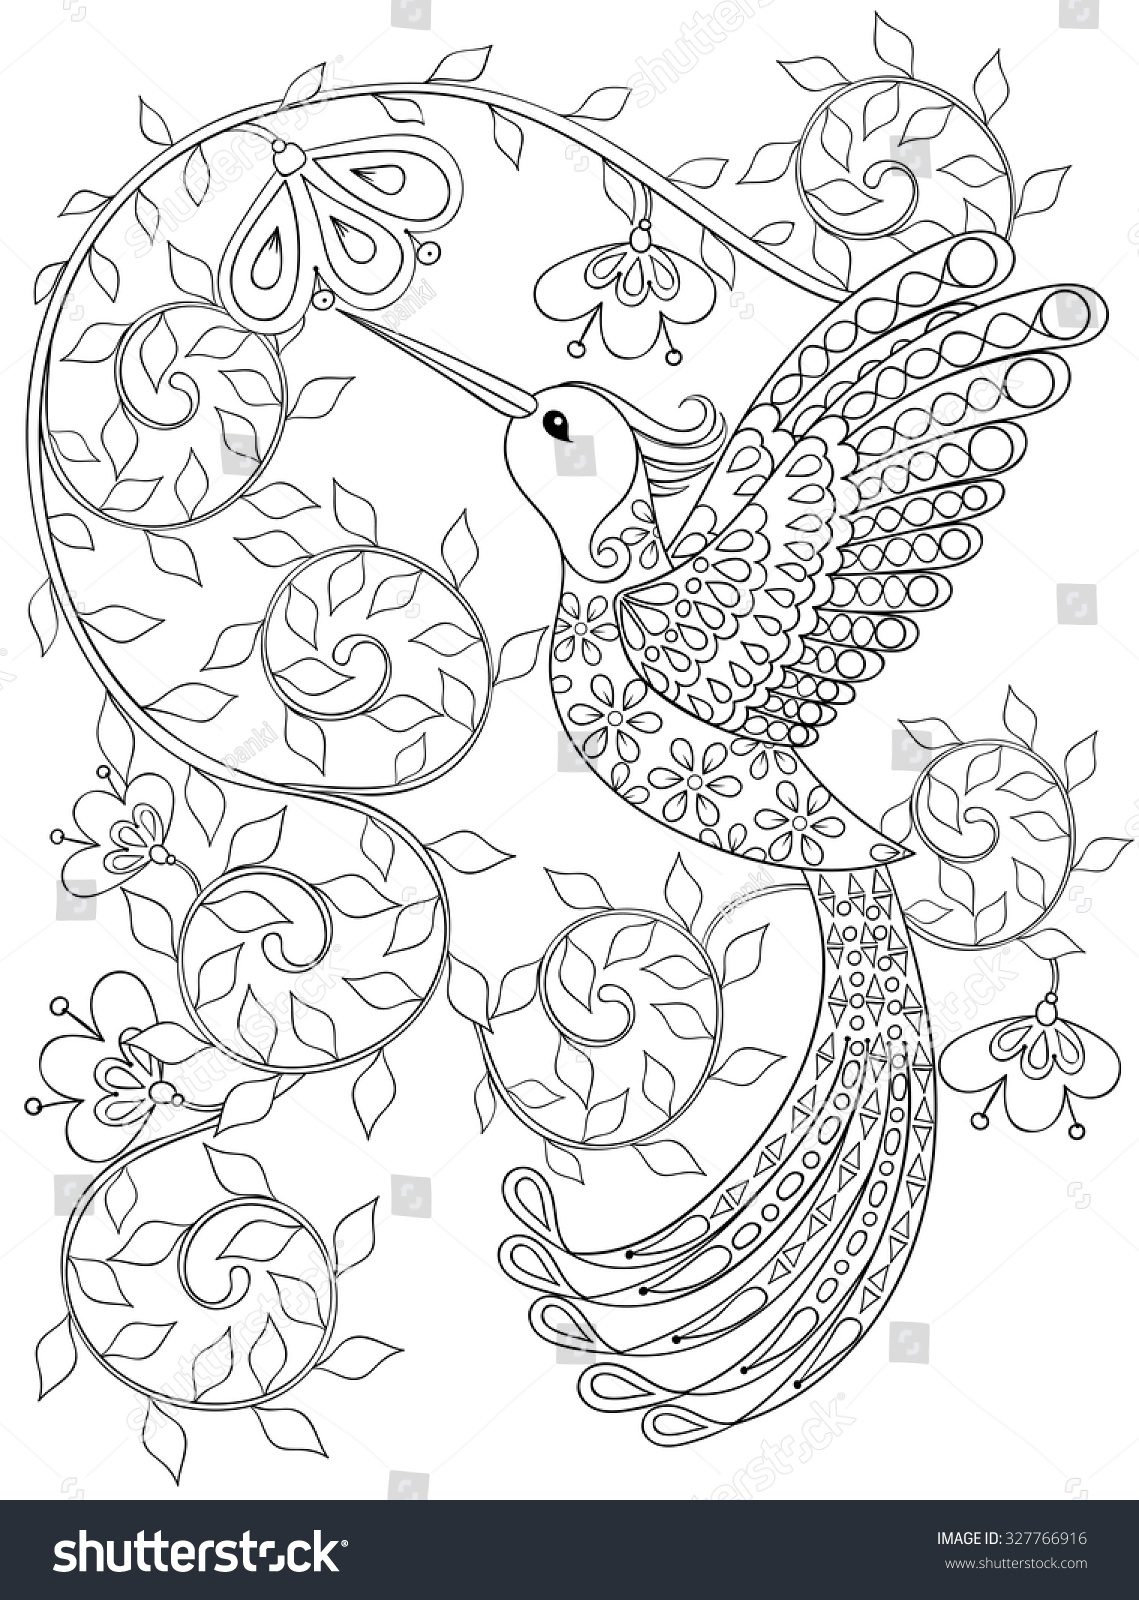 Coloring page with Hummingbird zentangle flying bird for adult Coloring books or tattoos with high